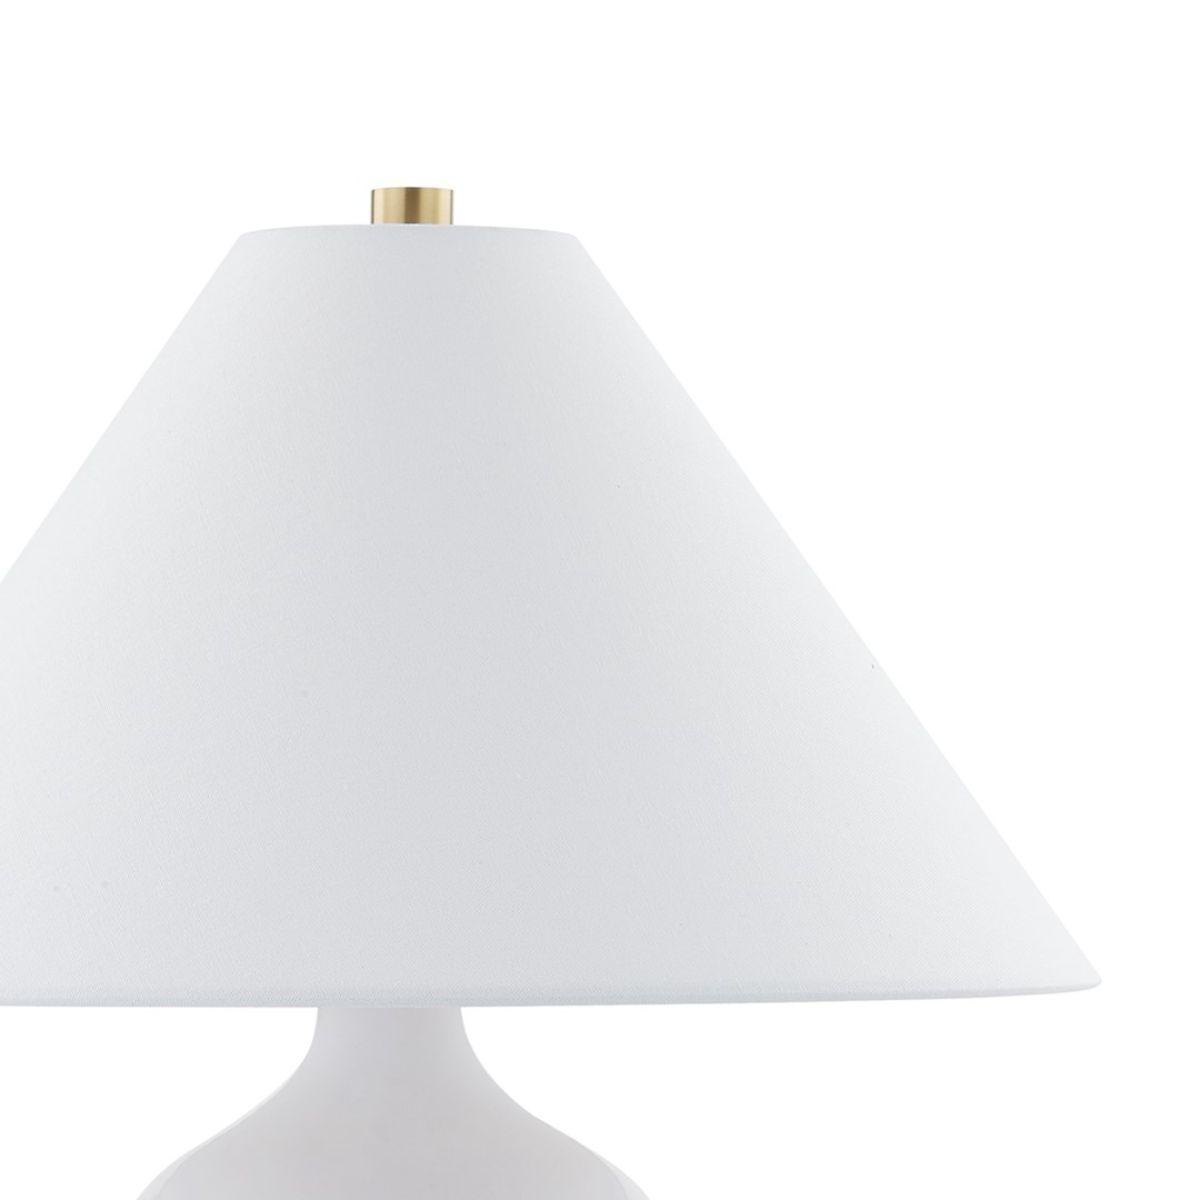 Aimee Table Lamp Ceramic Blue Ombre with Aged Brass Accents